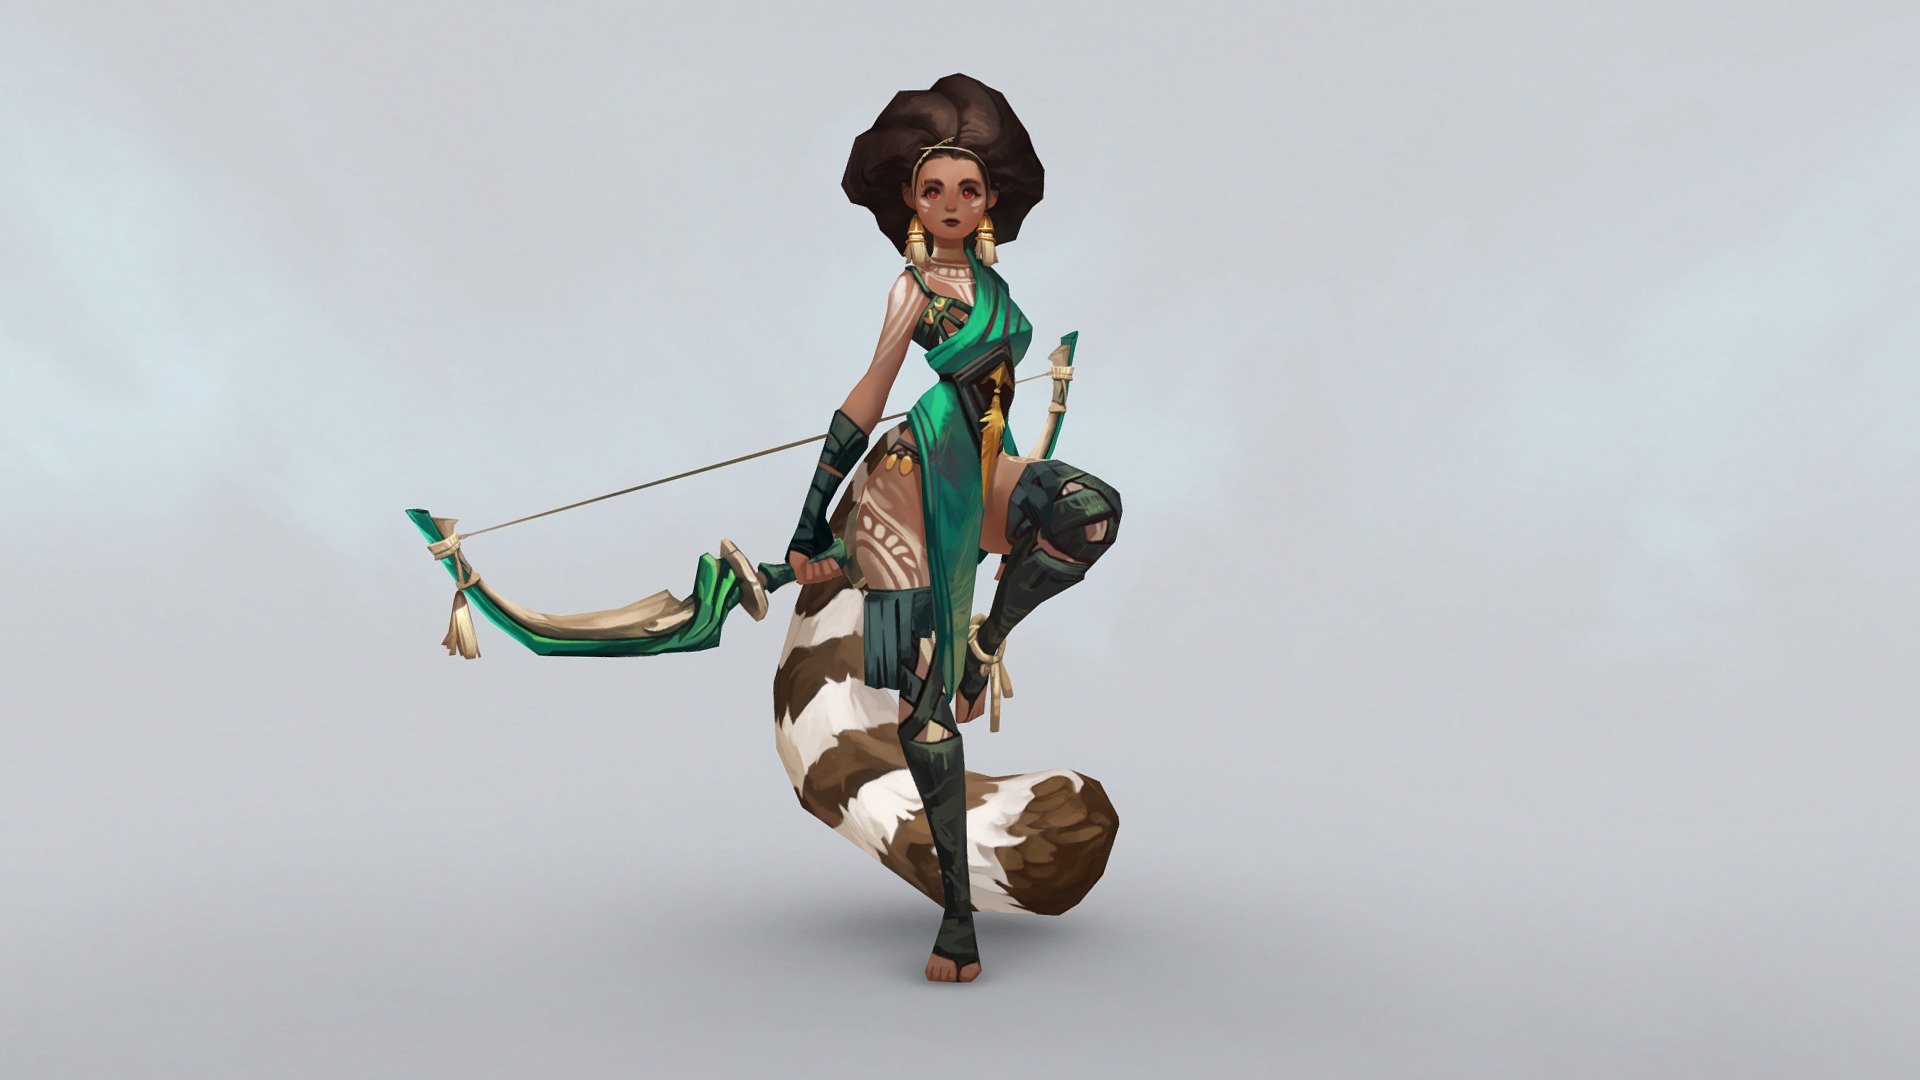 Handpainted low poly character, done for learning purposes 

Original concept art by Khoa Viet, https://www.artstation.com/artwork/x4OvE

Check him out, he has the most fantastic character concepts :D - Ringtail Gurl - 3D model by hanajones 3d model